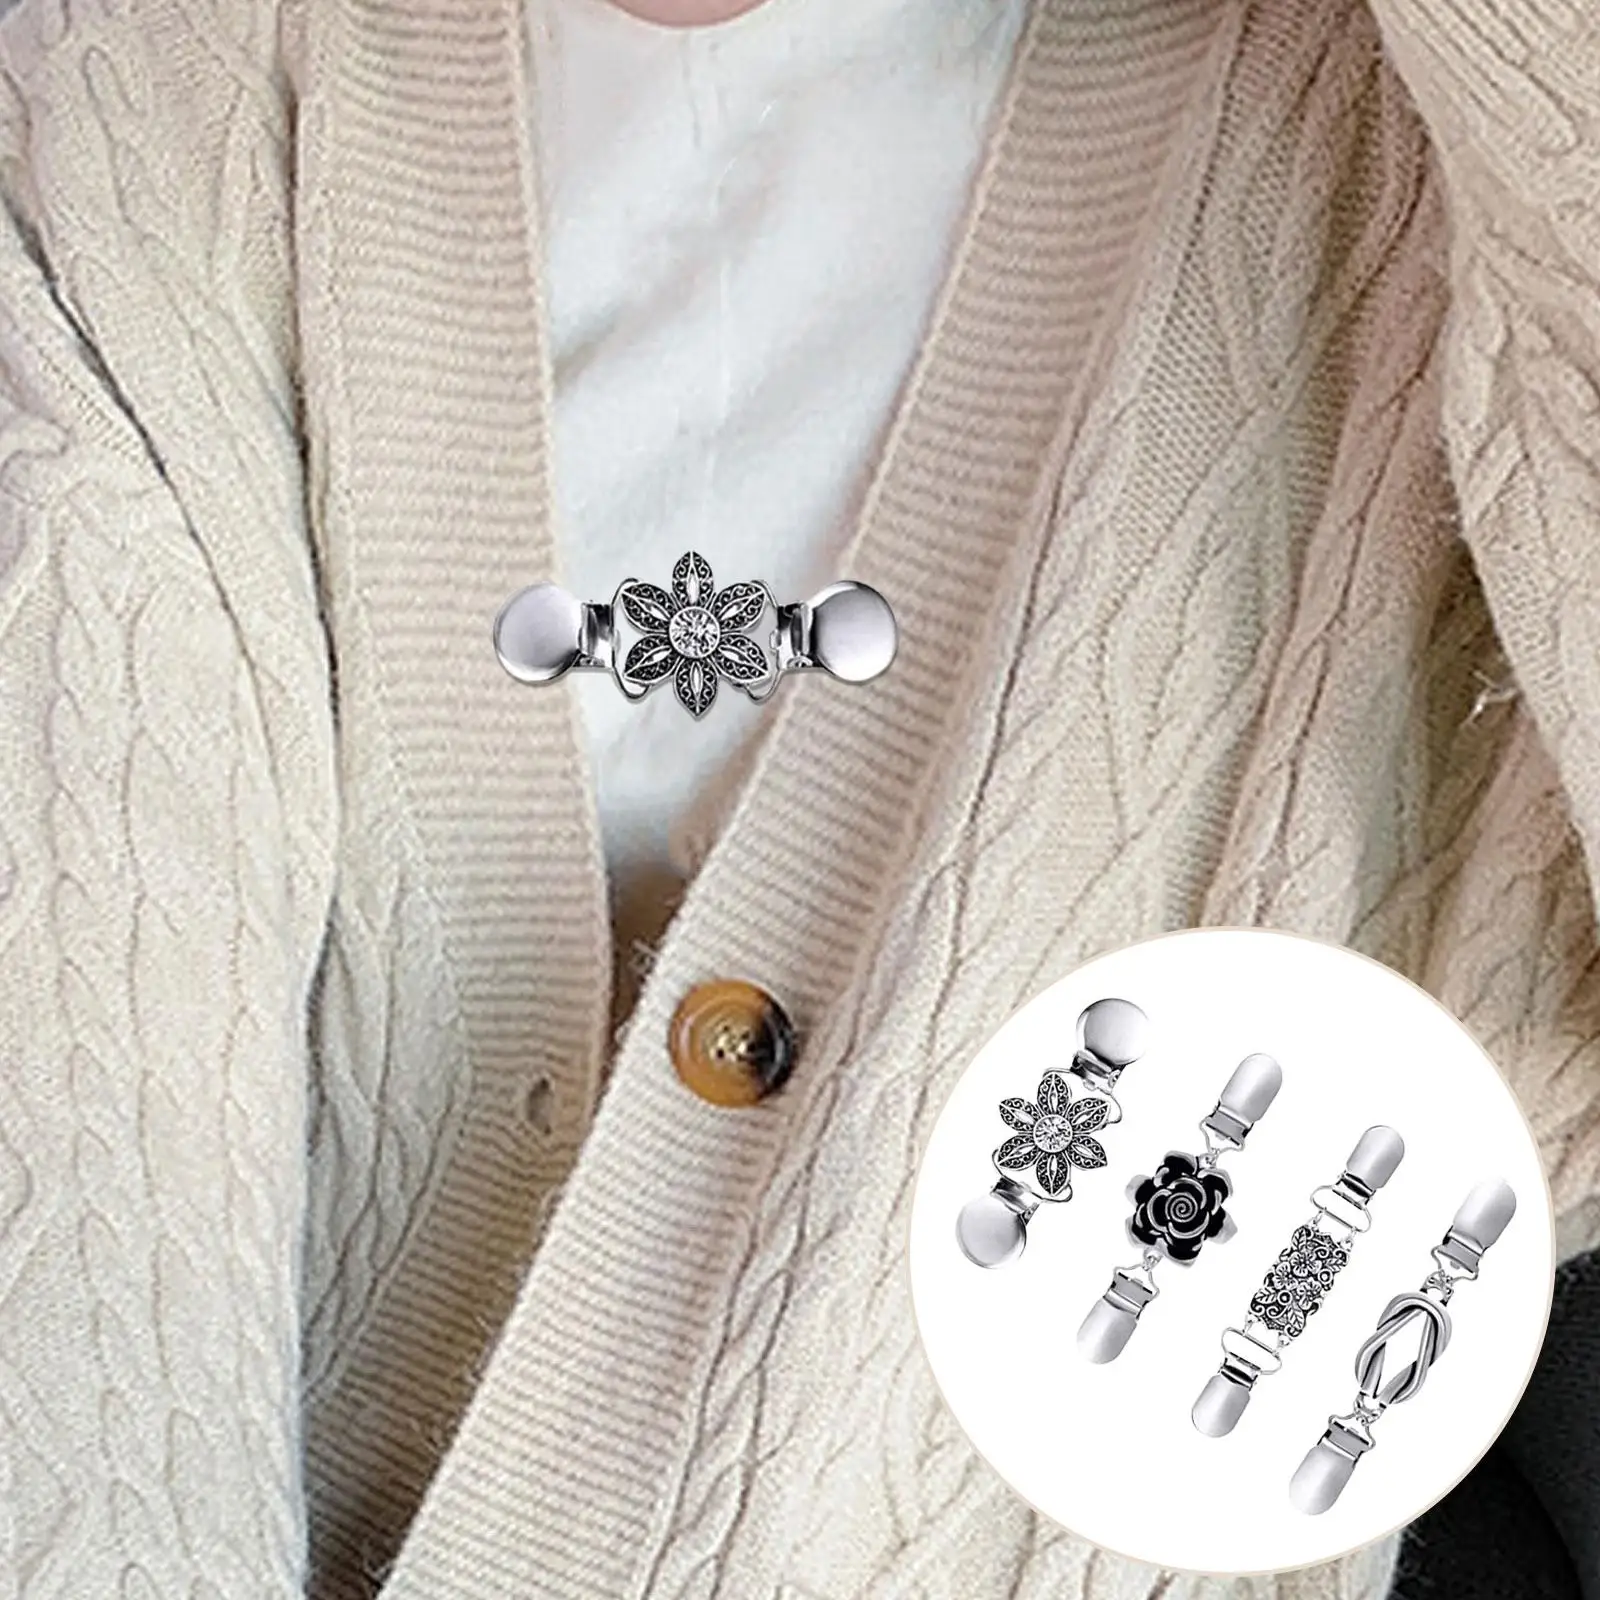 4x Retro Style Duck Clips Cardigan Holder Dresses Elegant Beaded Pearl 4 Styles for Jackets Clothes Female Dress T-Shirt Scarf